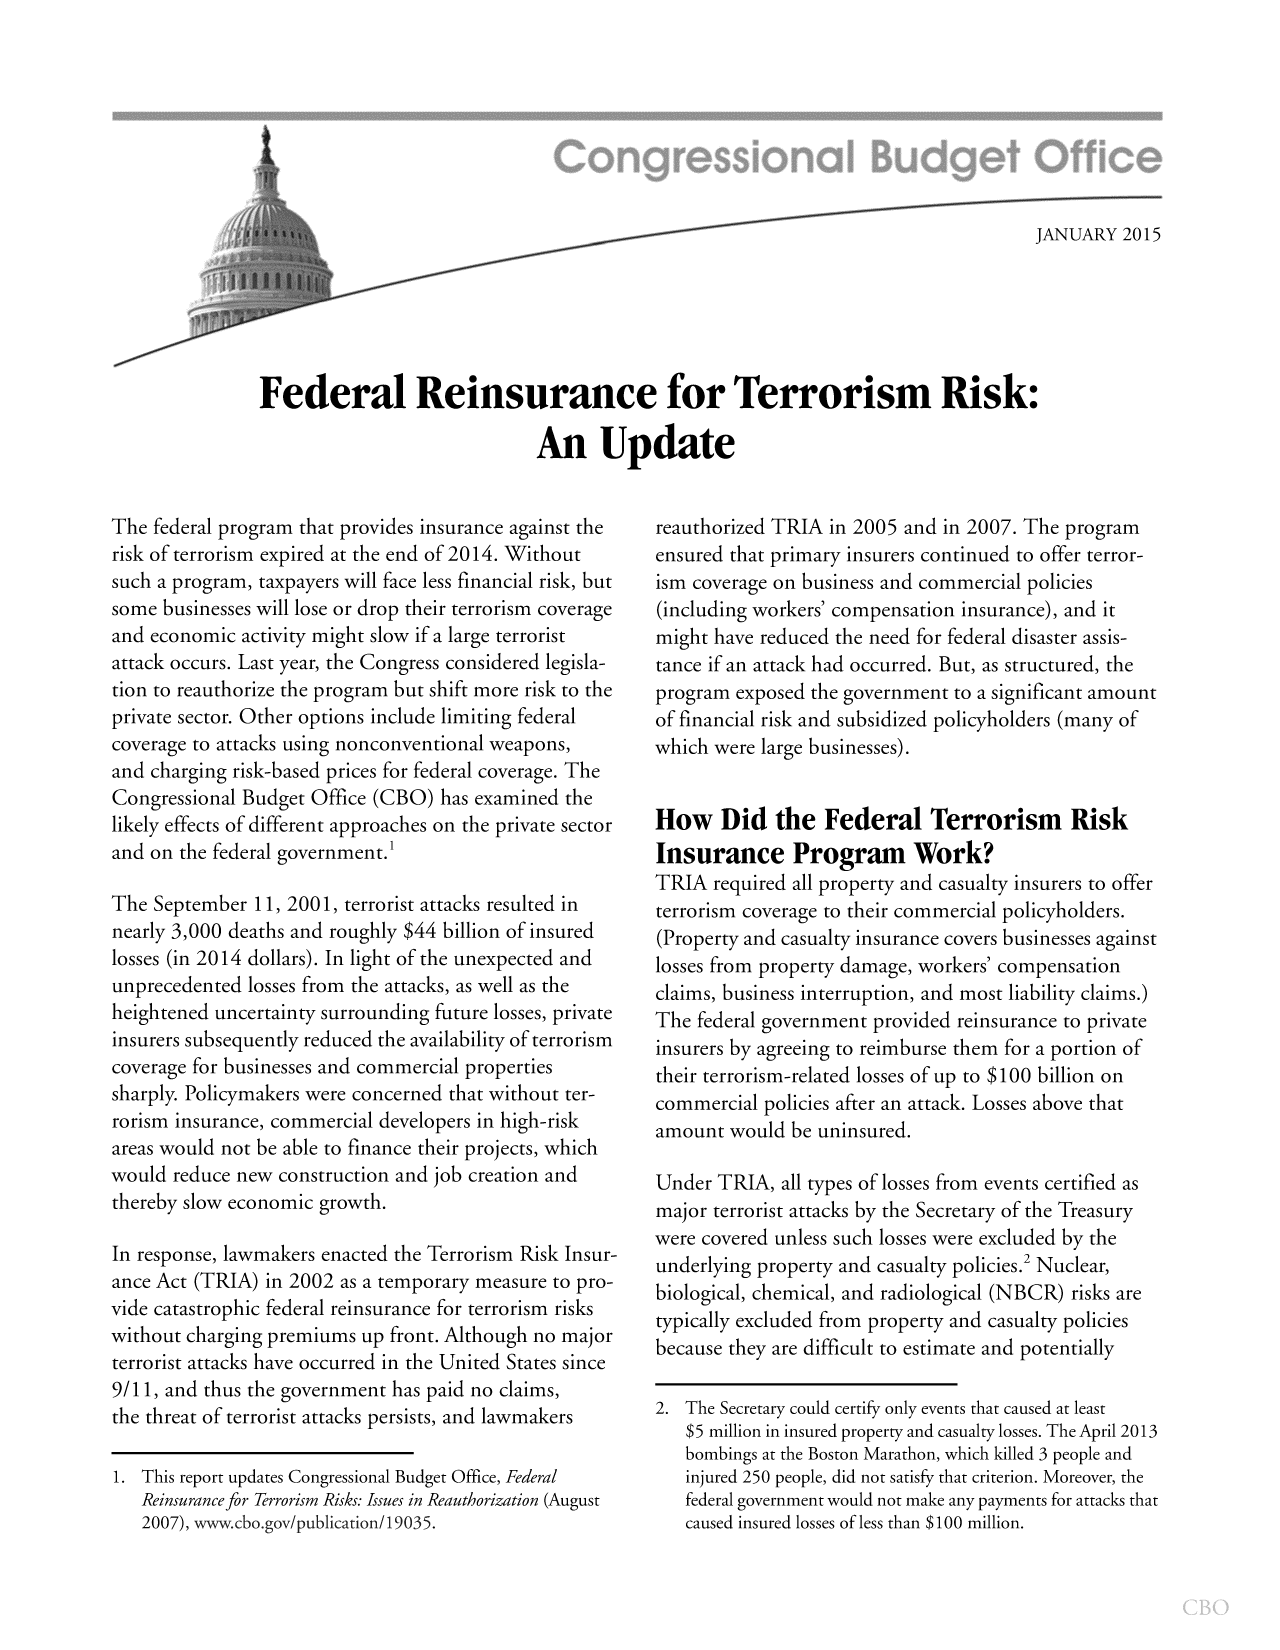 handle is hein.congrec/cbo2021 and id is 1 raw text is: JANUARY 2015
Federal Reinsurance for Terrorism Risk:
An Update

The federal program that provides insurance against the
risk of terrorism expired at the end of 2014. Without
such a program, taxpayers will face less financial risk, but
some businesses will lose or drop their terrorism coverage
and economic activity might slow if a large terrorist
attack occurs. Last year, the Congress considered legisla-
tion to reauthorize the program but shift more risk to the
private sector. Other options include limiting federal
coverage to attacks using nonconventional weapons,
and charging risk-based prices for federal coverage. The
Congressional Budget Office (CBO) has examined the
likely effects of different approaches on the private sector
and on the federal government.
The September 11, 2001, terrorist attacks resulted in
nearly 3,000 deaths and roughly $44 billion of insured
losses (in 2014 dollars). In light of the unexpected and
unprecedented losses from the attacks, as well as the
heightened uncertainty surrounding future losses, private
insurers subsequently reduced the availability of terrorism
coverage for businesses and commercial properties
sharply. Policymakers were concerned that without ter-
rorism insurance, commercial developers in high-risk
areas would not be able to finance their projects, which
would reduce new construction and job creation and
thereby slow economic growth.
In response, lawmakers enacted the Terrorism Risk Insur-
ance Act (TRIA) in 2002 as a temporary measure to pro-
vide catastrophic federal reinsurance for terrorism risks
without charging premiums up front. Although no major
terrorist attacks have occurred in the United States since
9/11, and thus the government has paid no claims,
the threat of terrorist attacks persists, and lawmakers
1. This report updates Congressional Budget Office, Federal
Reinsurance for Terrorism Risks: Issues in Reauthorization (August
2007), www.cbo.gov/publication/19035.

reauthorized TRIA in 2005 and in 2007. The program
ensured that primary insurers continued to offer terror-
ism coverage on business and commercial policies
(including workers' compensation insurance), and it
might have reduced the need for federal disaster assis-
tance if an attack had occurred. But, as structured, the
program exposed the government to a significant amount
of financial risk and subsidized policyholders (many of
which were large businesses).
How Did the Federal Terrorism Risk
Insurance Program Work?
TRIA required all property and casualty insurers to offer
terrorism coverage to their commercial policyholders.
(Property and casualty insurance covers businesses against
losses from property damage, workers' compensation
claims, business interruption, and most liability claims.)
The federal government provided reinsurance to private
insurers by agreeing to reimburse them for a portion of
their terrorism-related losses of up to $100 billion on
commercial policies after an attack. Losses above that
amount would be uninsured.
Under TRIA, all types of losses from events certified as
major terrorist attacks by the Secretary of the Treasury
were covered unless such losses were excluded by the
underlying property and casualty policies.2Nuclear,
biological, chemical, and radiological (NBCR) risks are
typically excluded from property and casualty policies
because they are difficult to estimate and potentially
2. The Secretary could certify only events that caused at least
$5 million in insured property and casualty losses. The April 2013
bombings at the Boston Marathon, which killed 3 people and
injured 250 people, did not satisfy that criterion. Moreover, the
federal government would not make any payments for attacks that
caused insured losses of less than $100 million.


